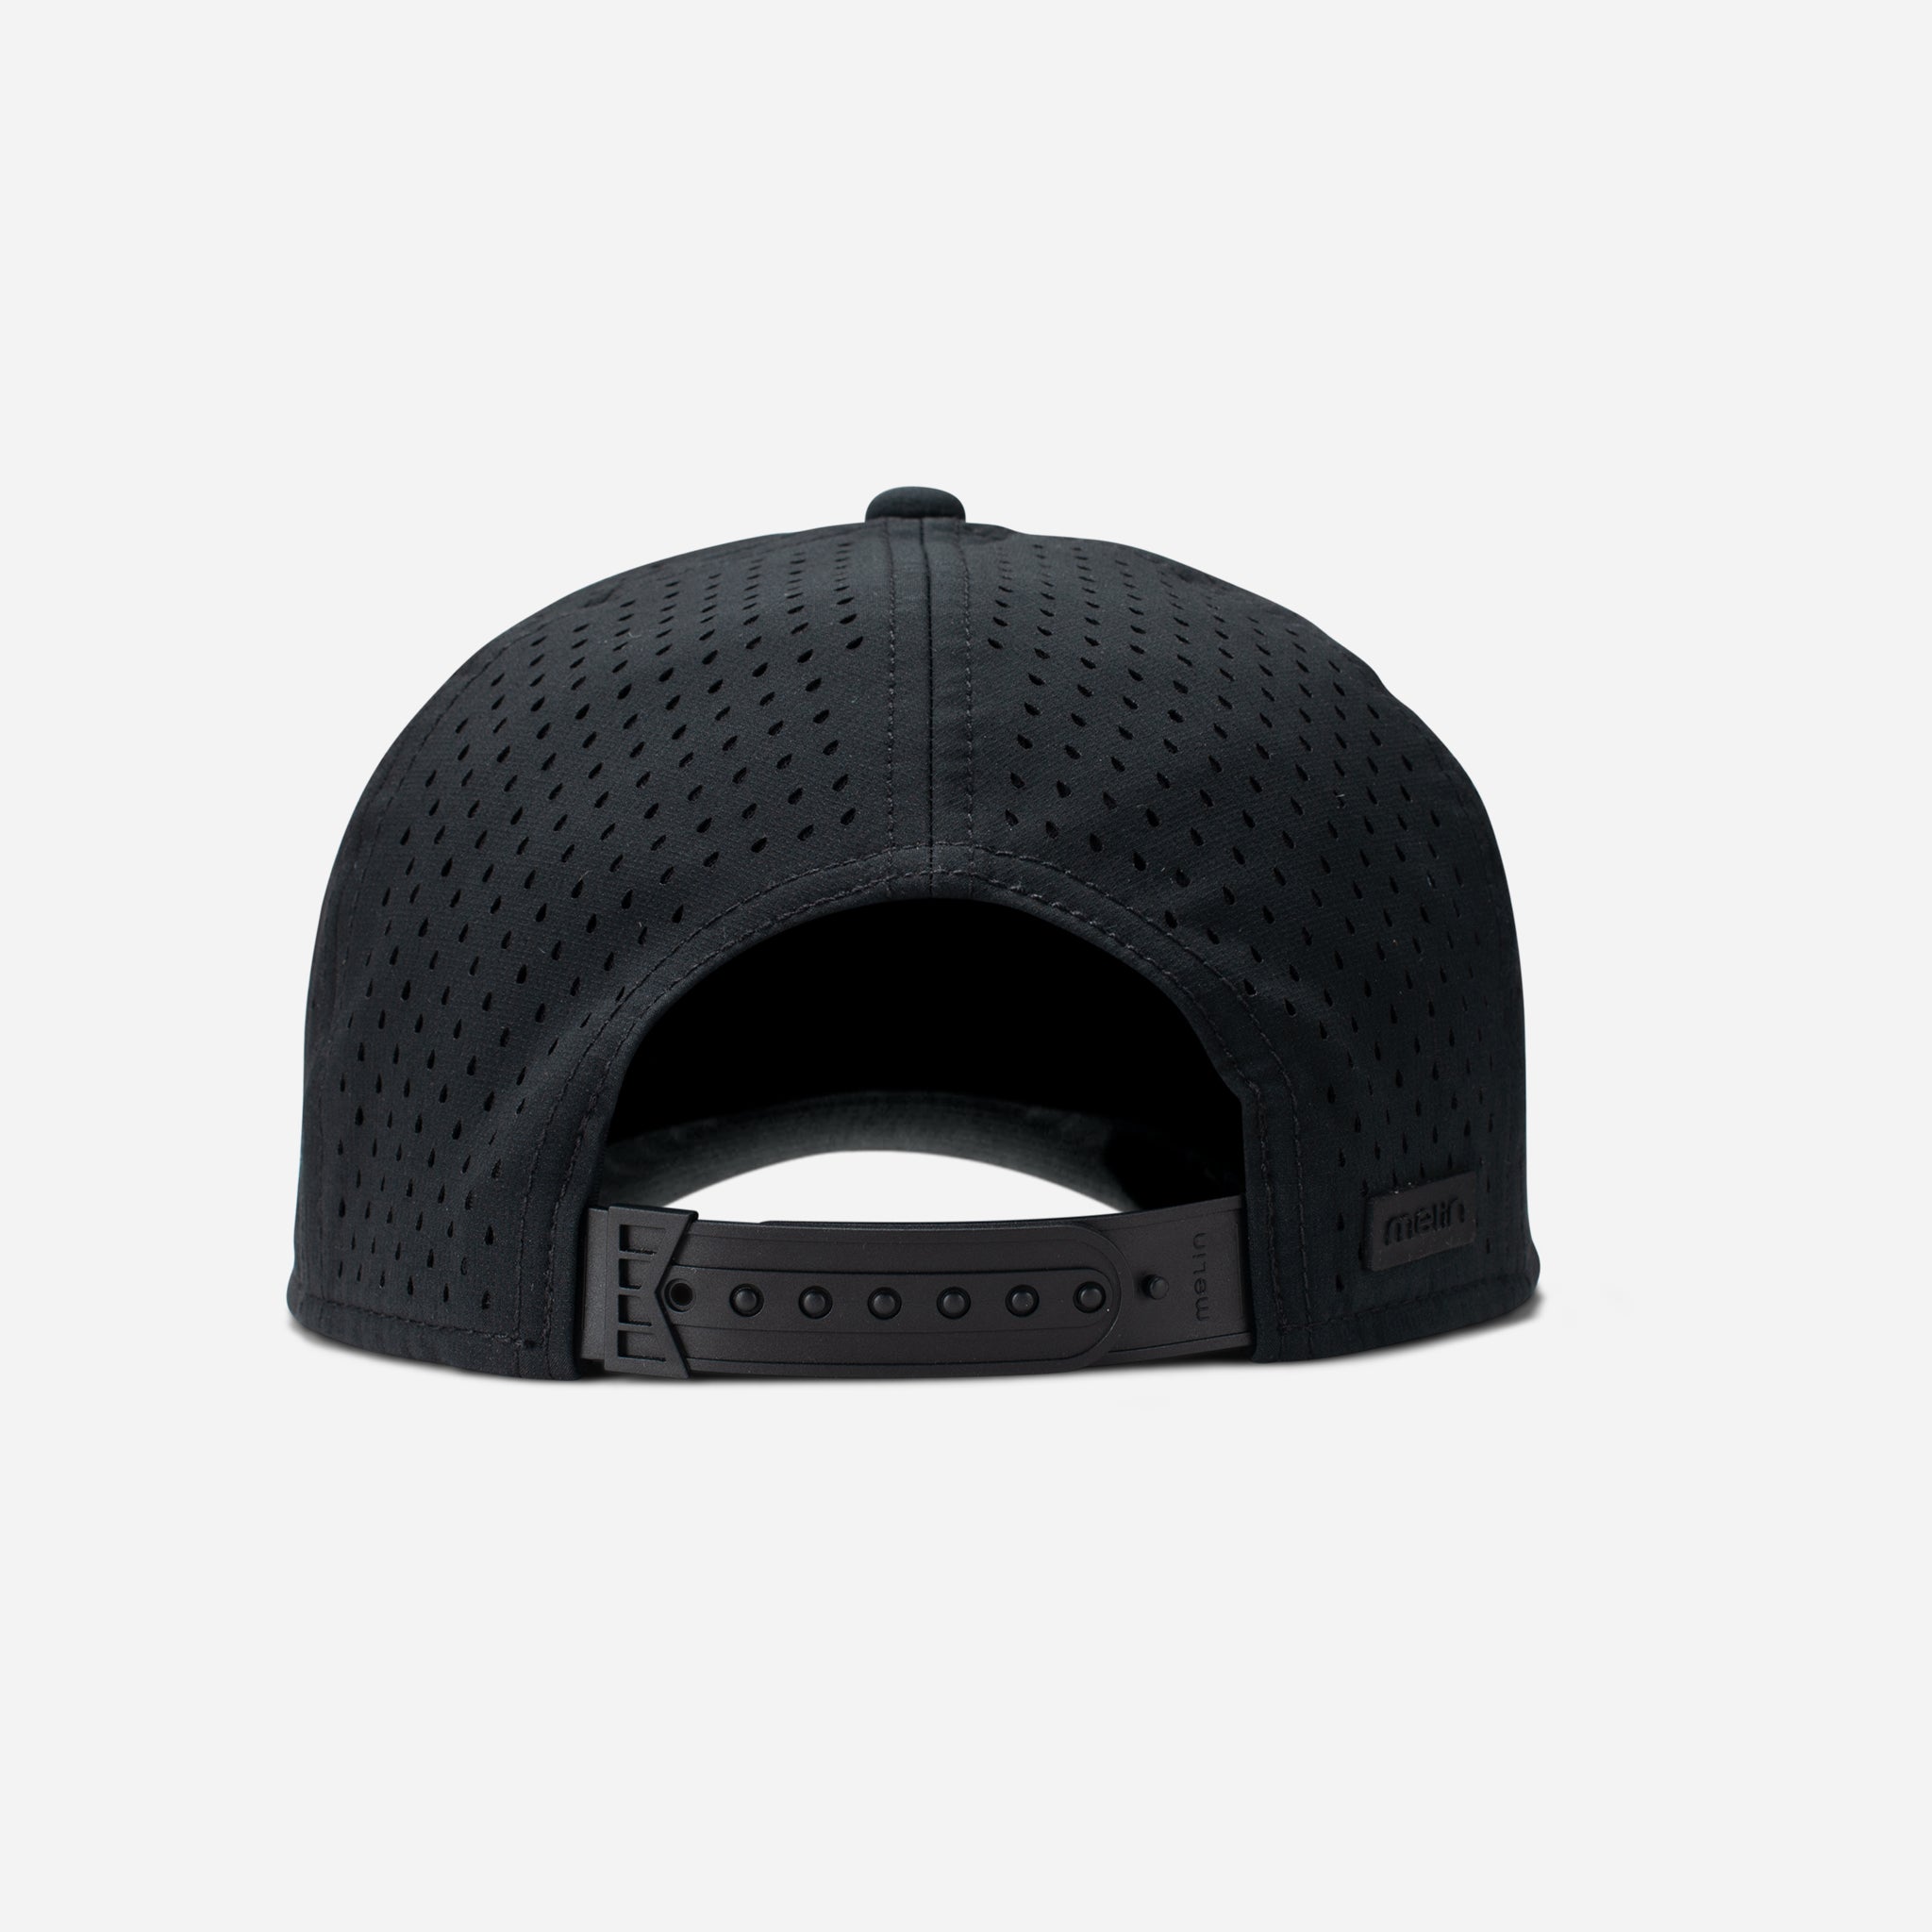 Vessel x Melin Trenches Hydro Hat